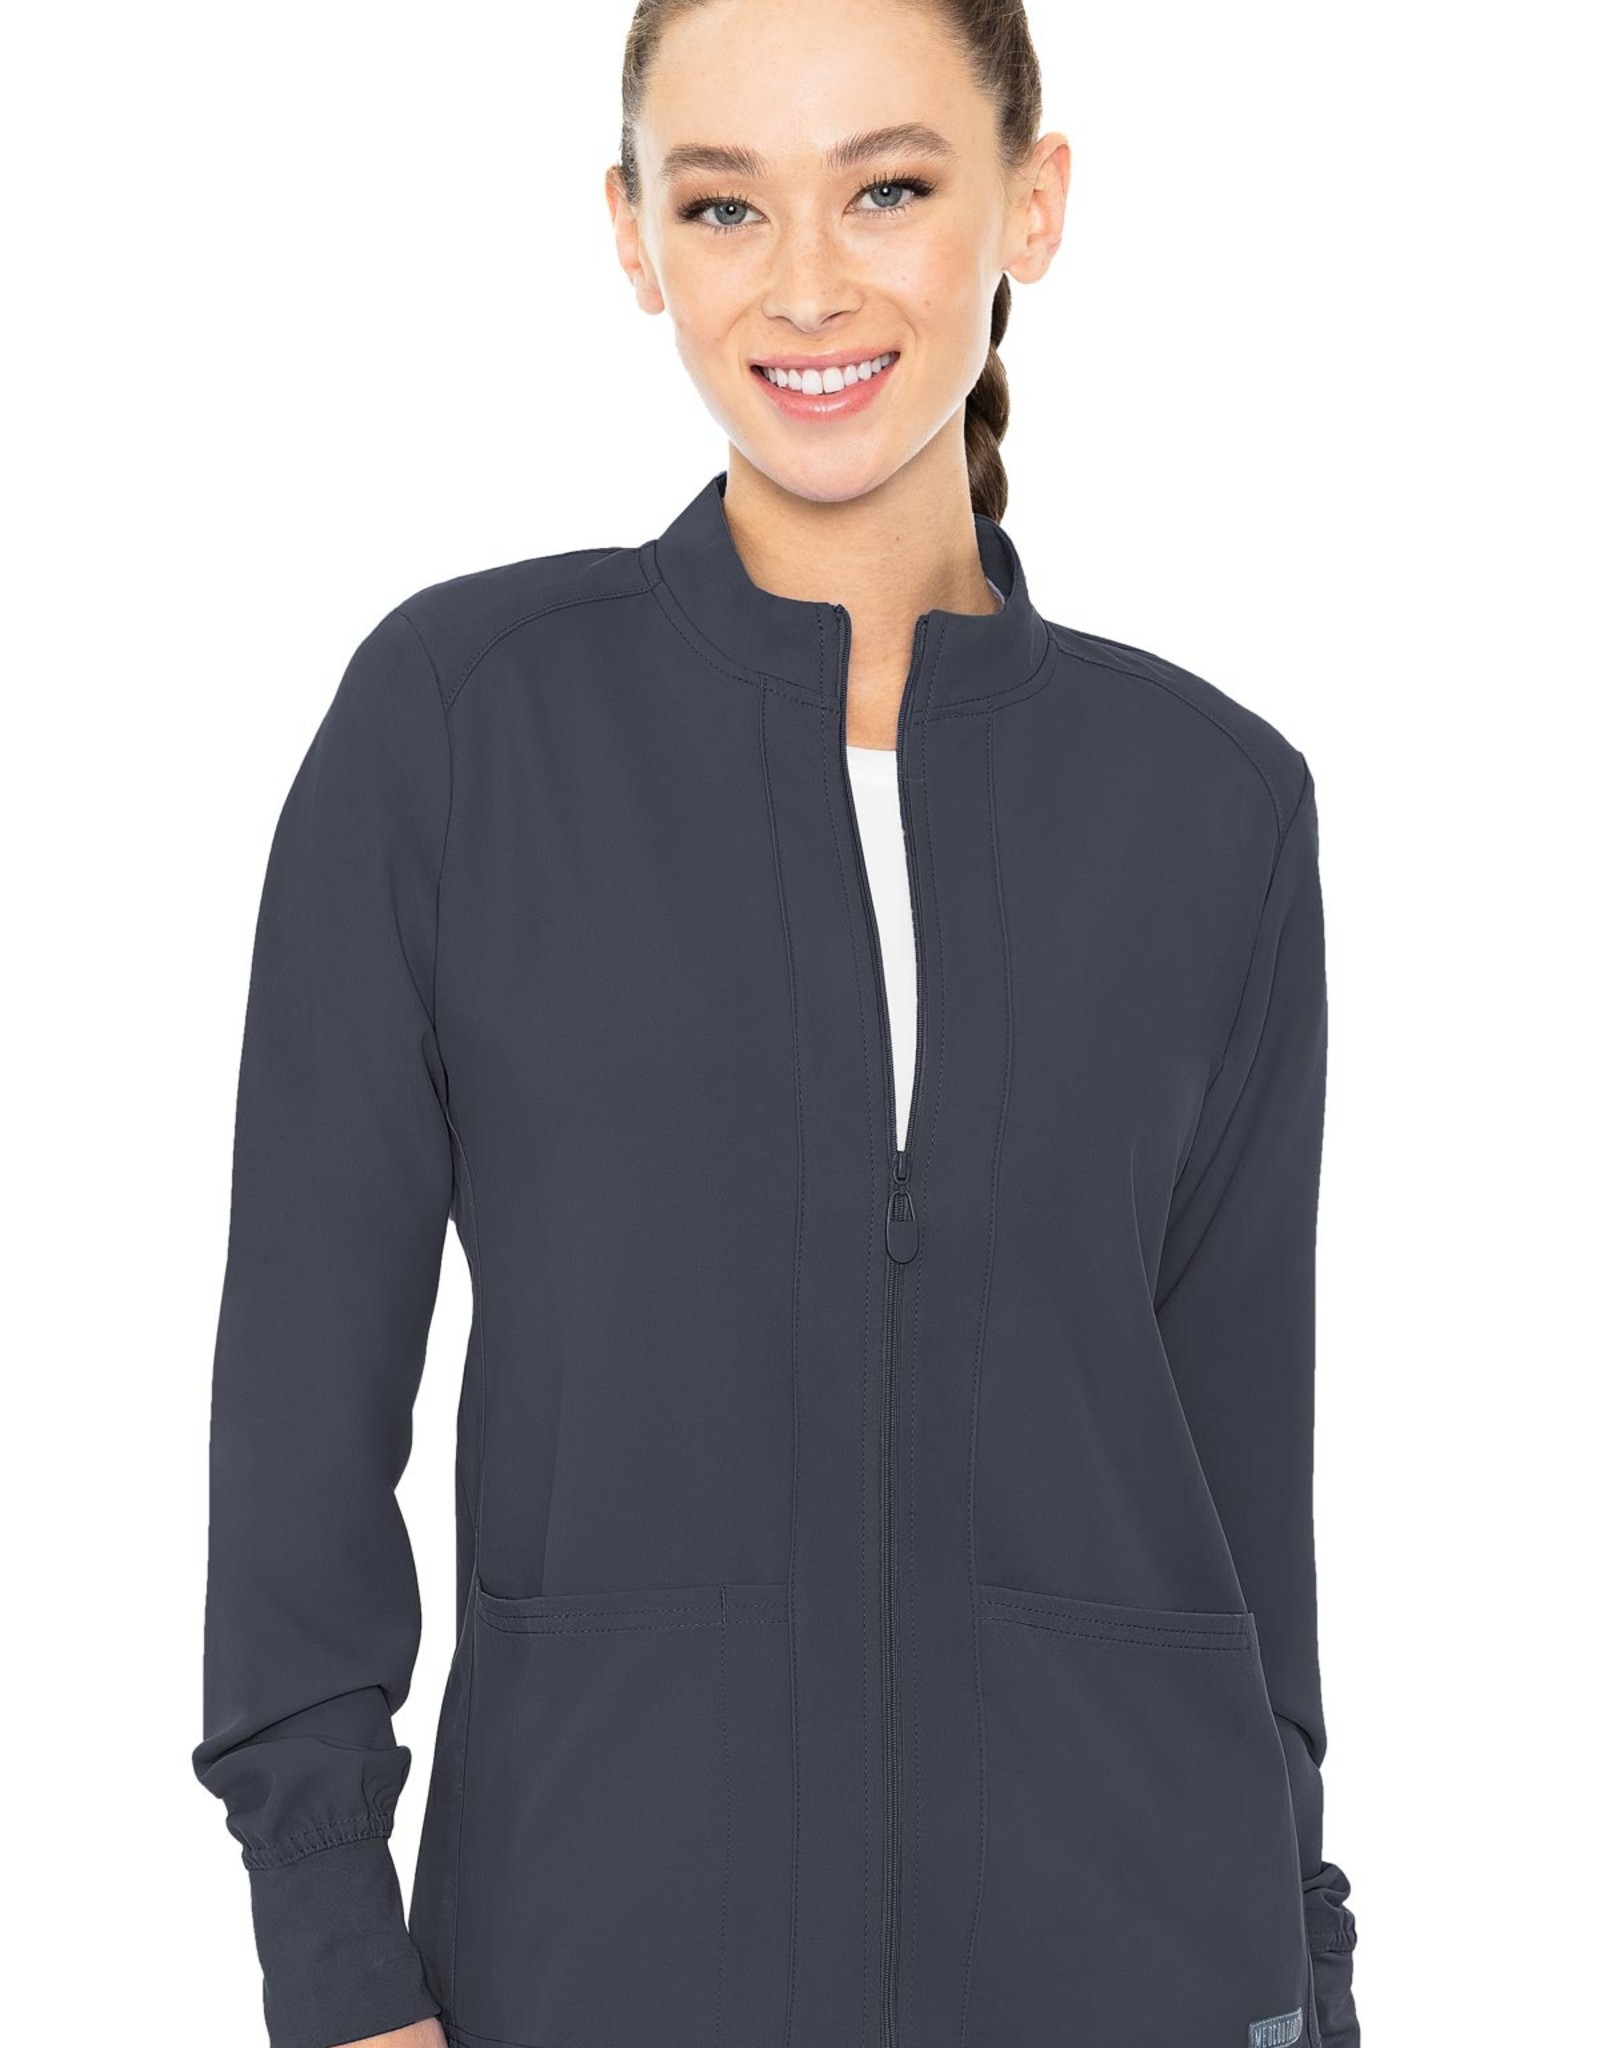 Med Couture Insight Women's Front pocket Warm Up (Regular and Plus)